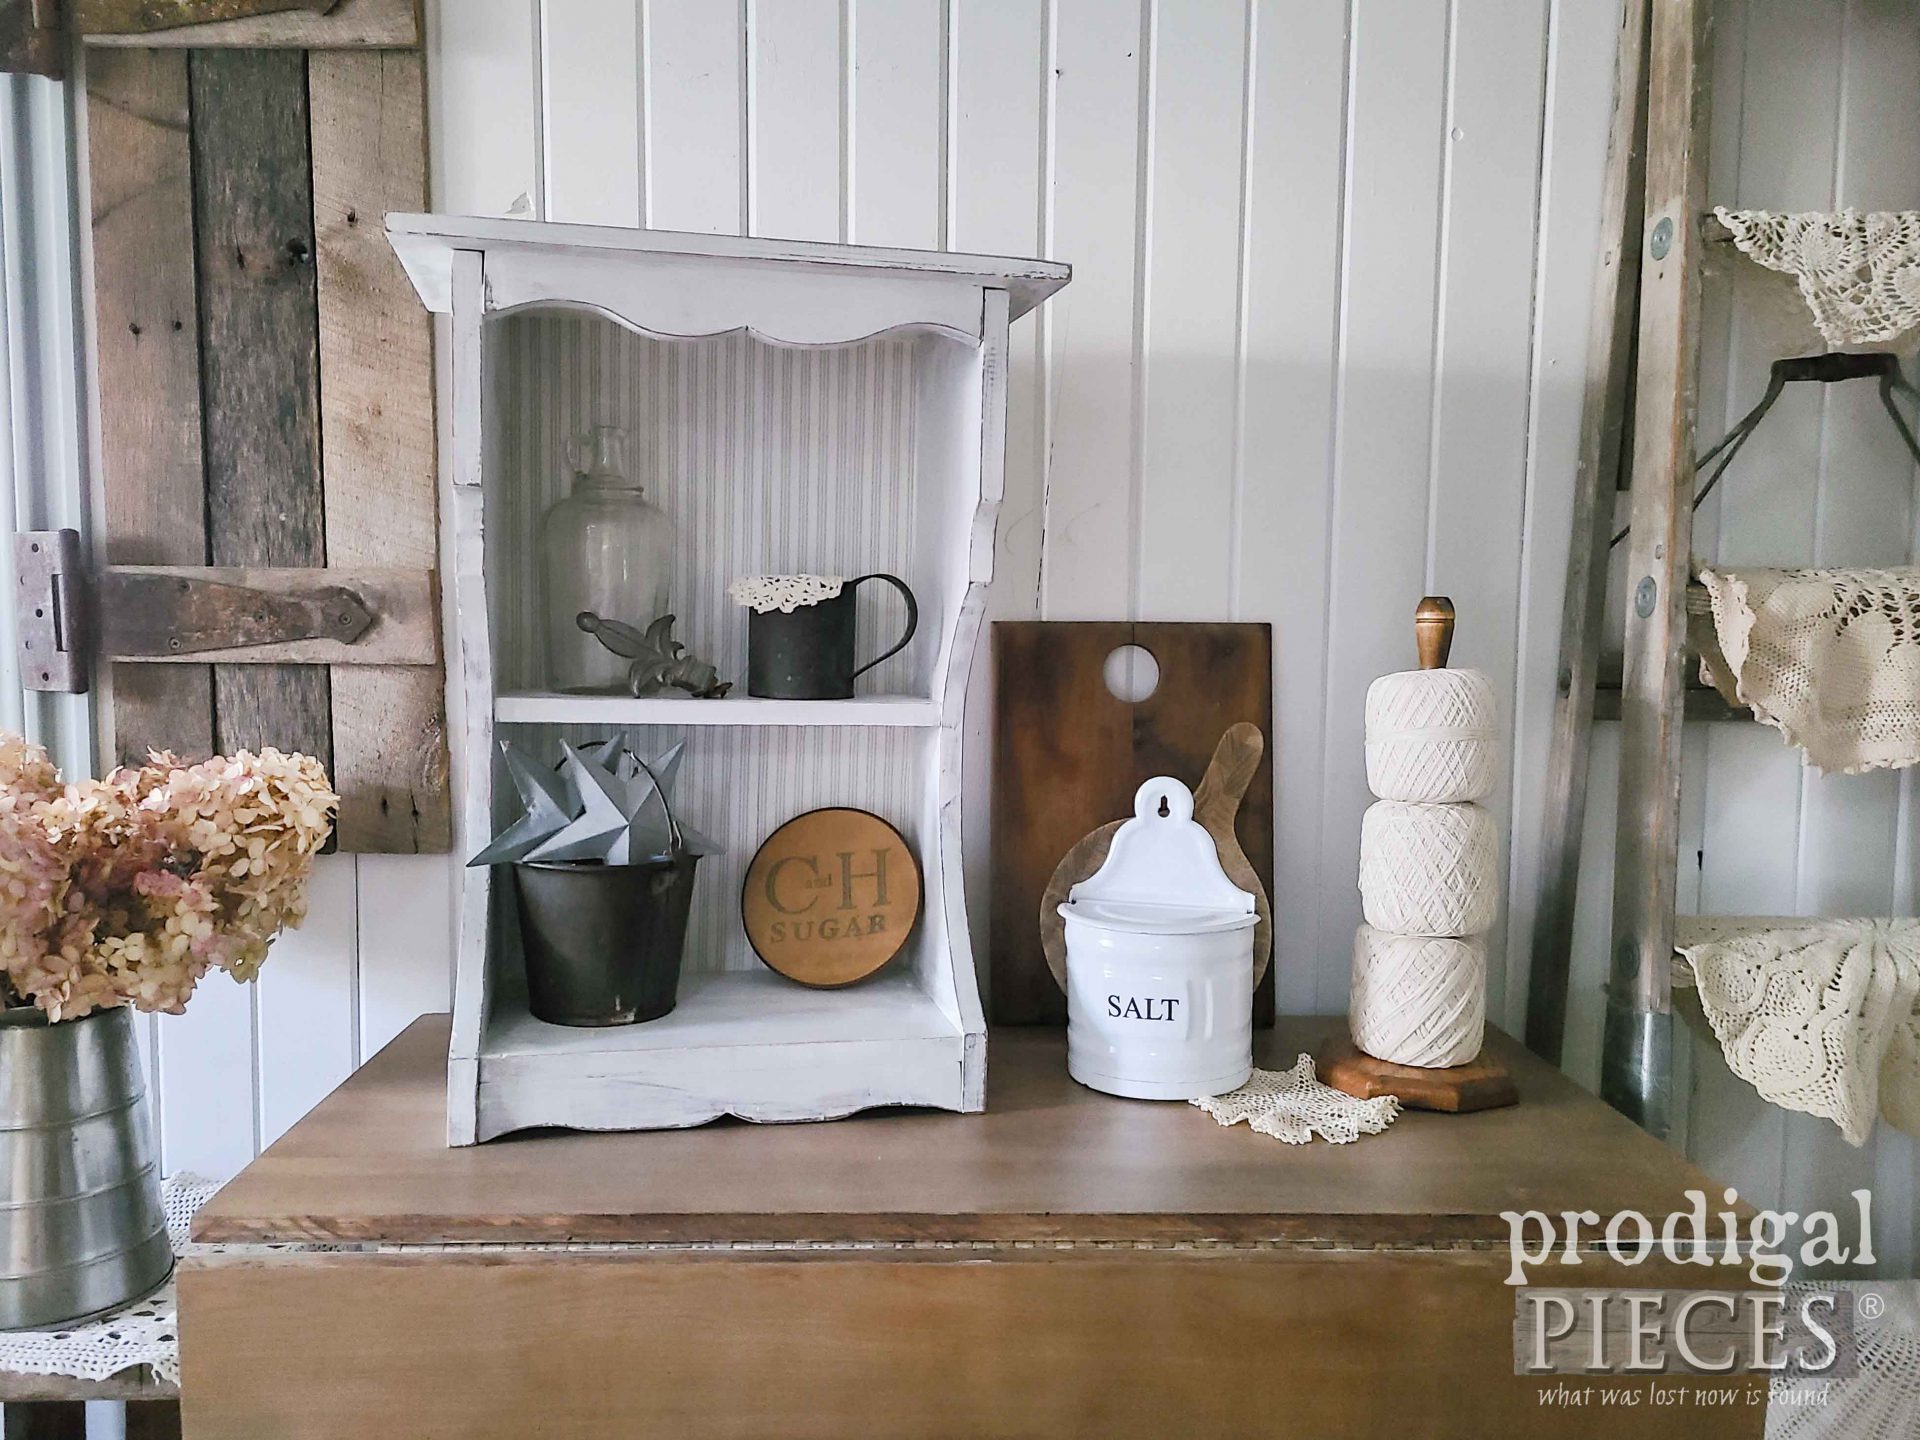 Chippy White Wooden Shelf Updated with Milk Paint by Larissa of Prodigal Pieces | prodigalpieces.com #prodigalpieces #farmhouse #diy